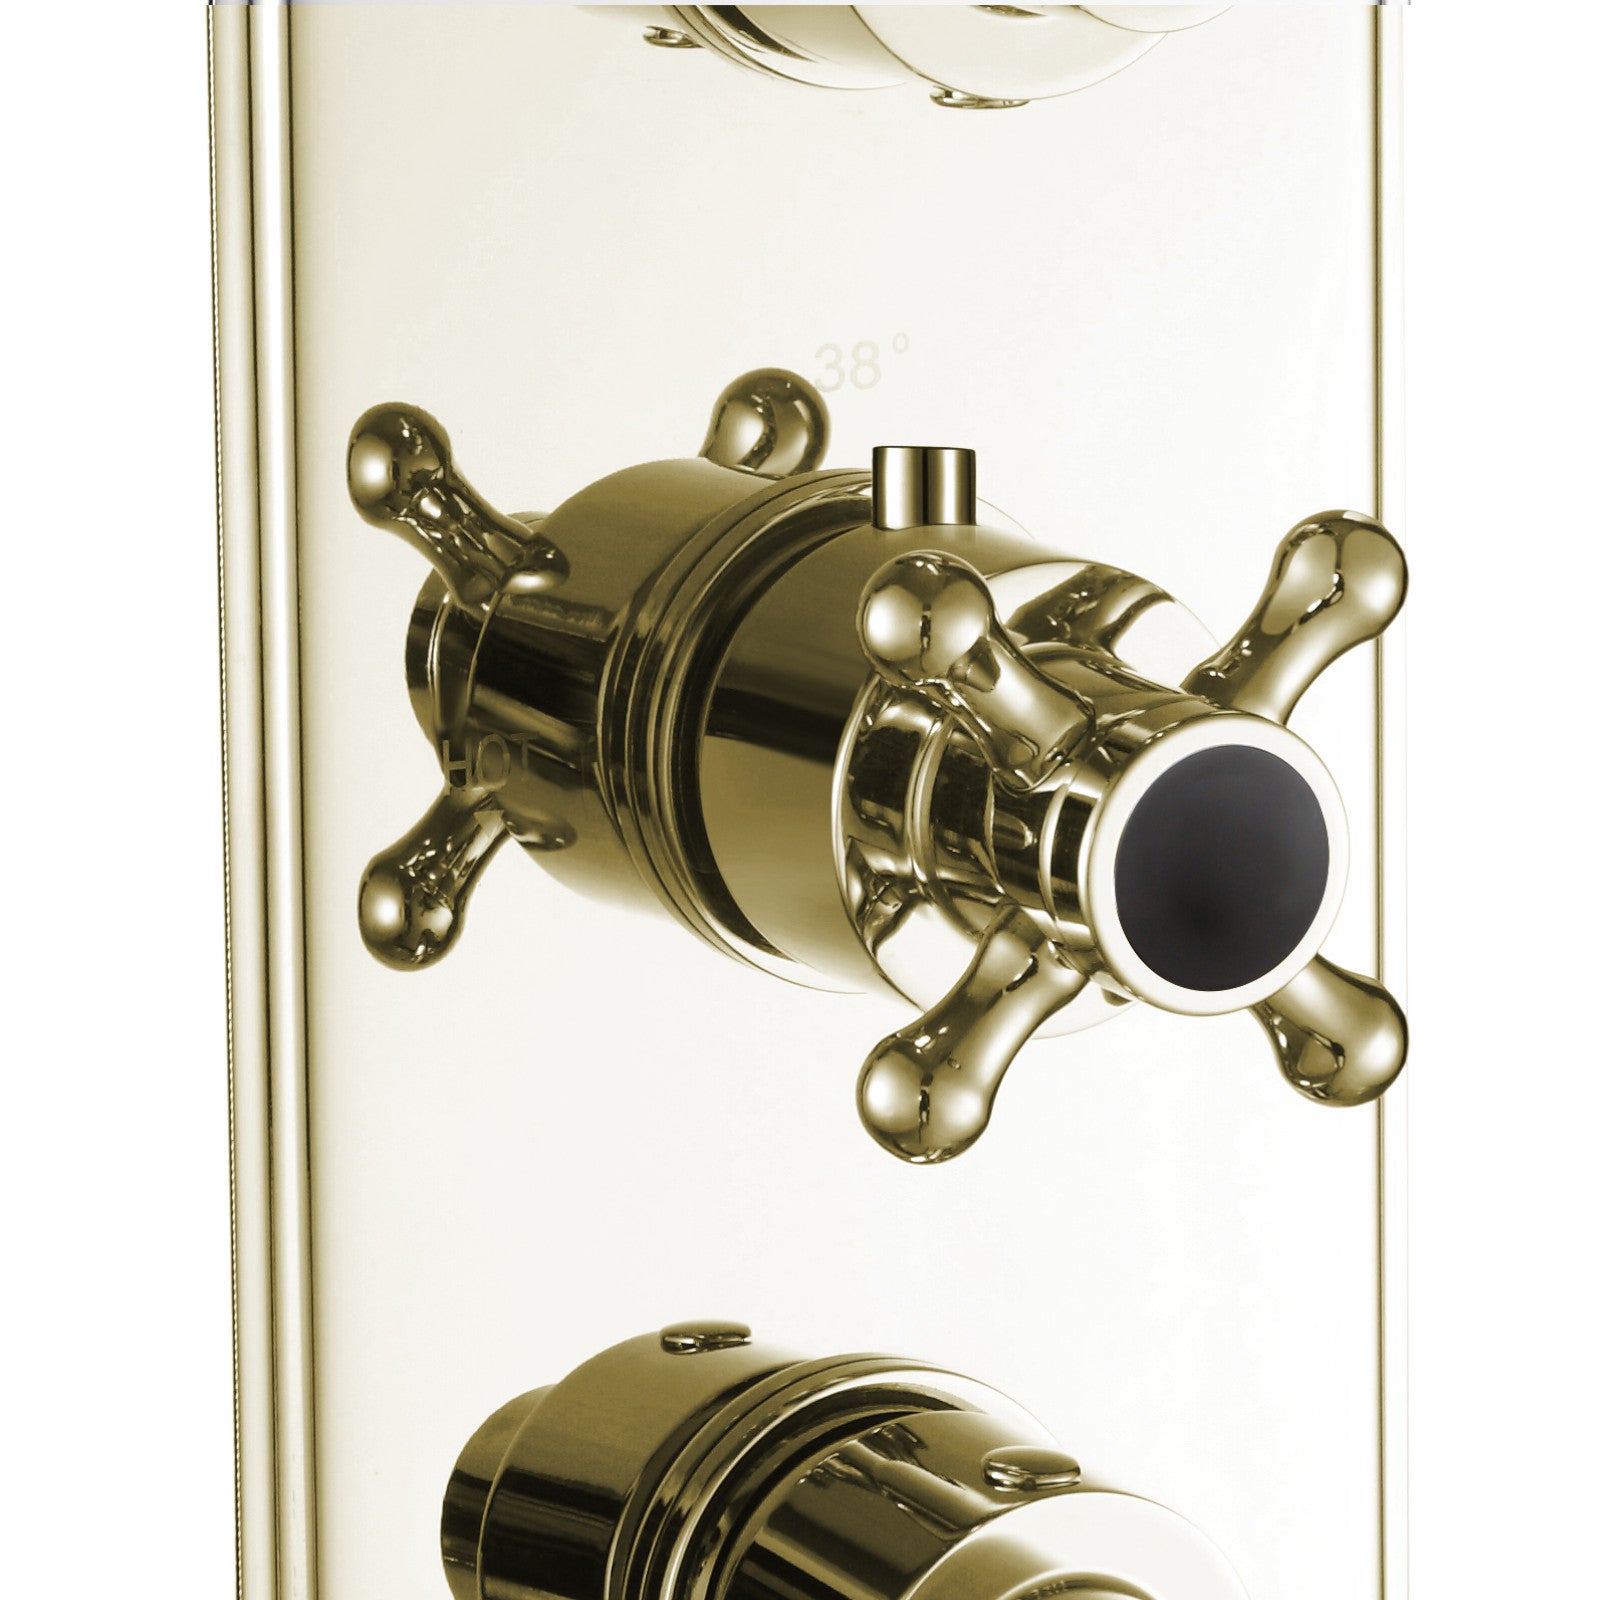 Regent traditional crosshead and black lever concealed thermostatic triple shower valve with 2 outlets - English gold - Showers